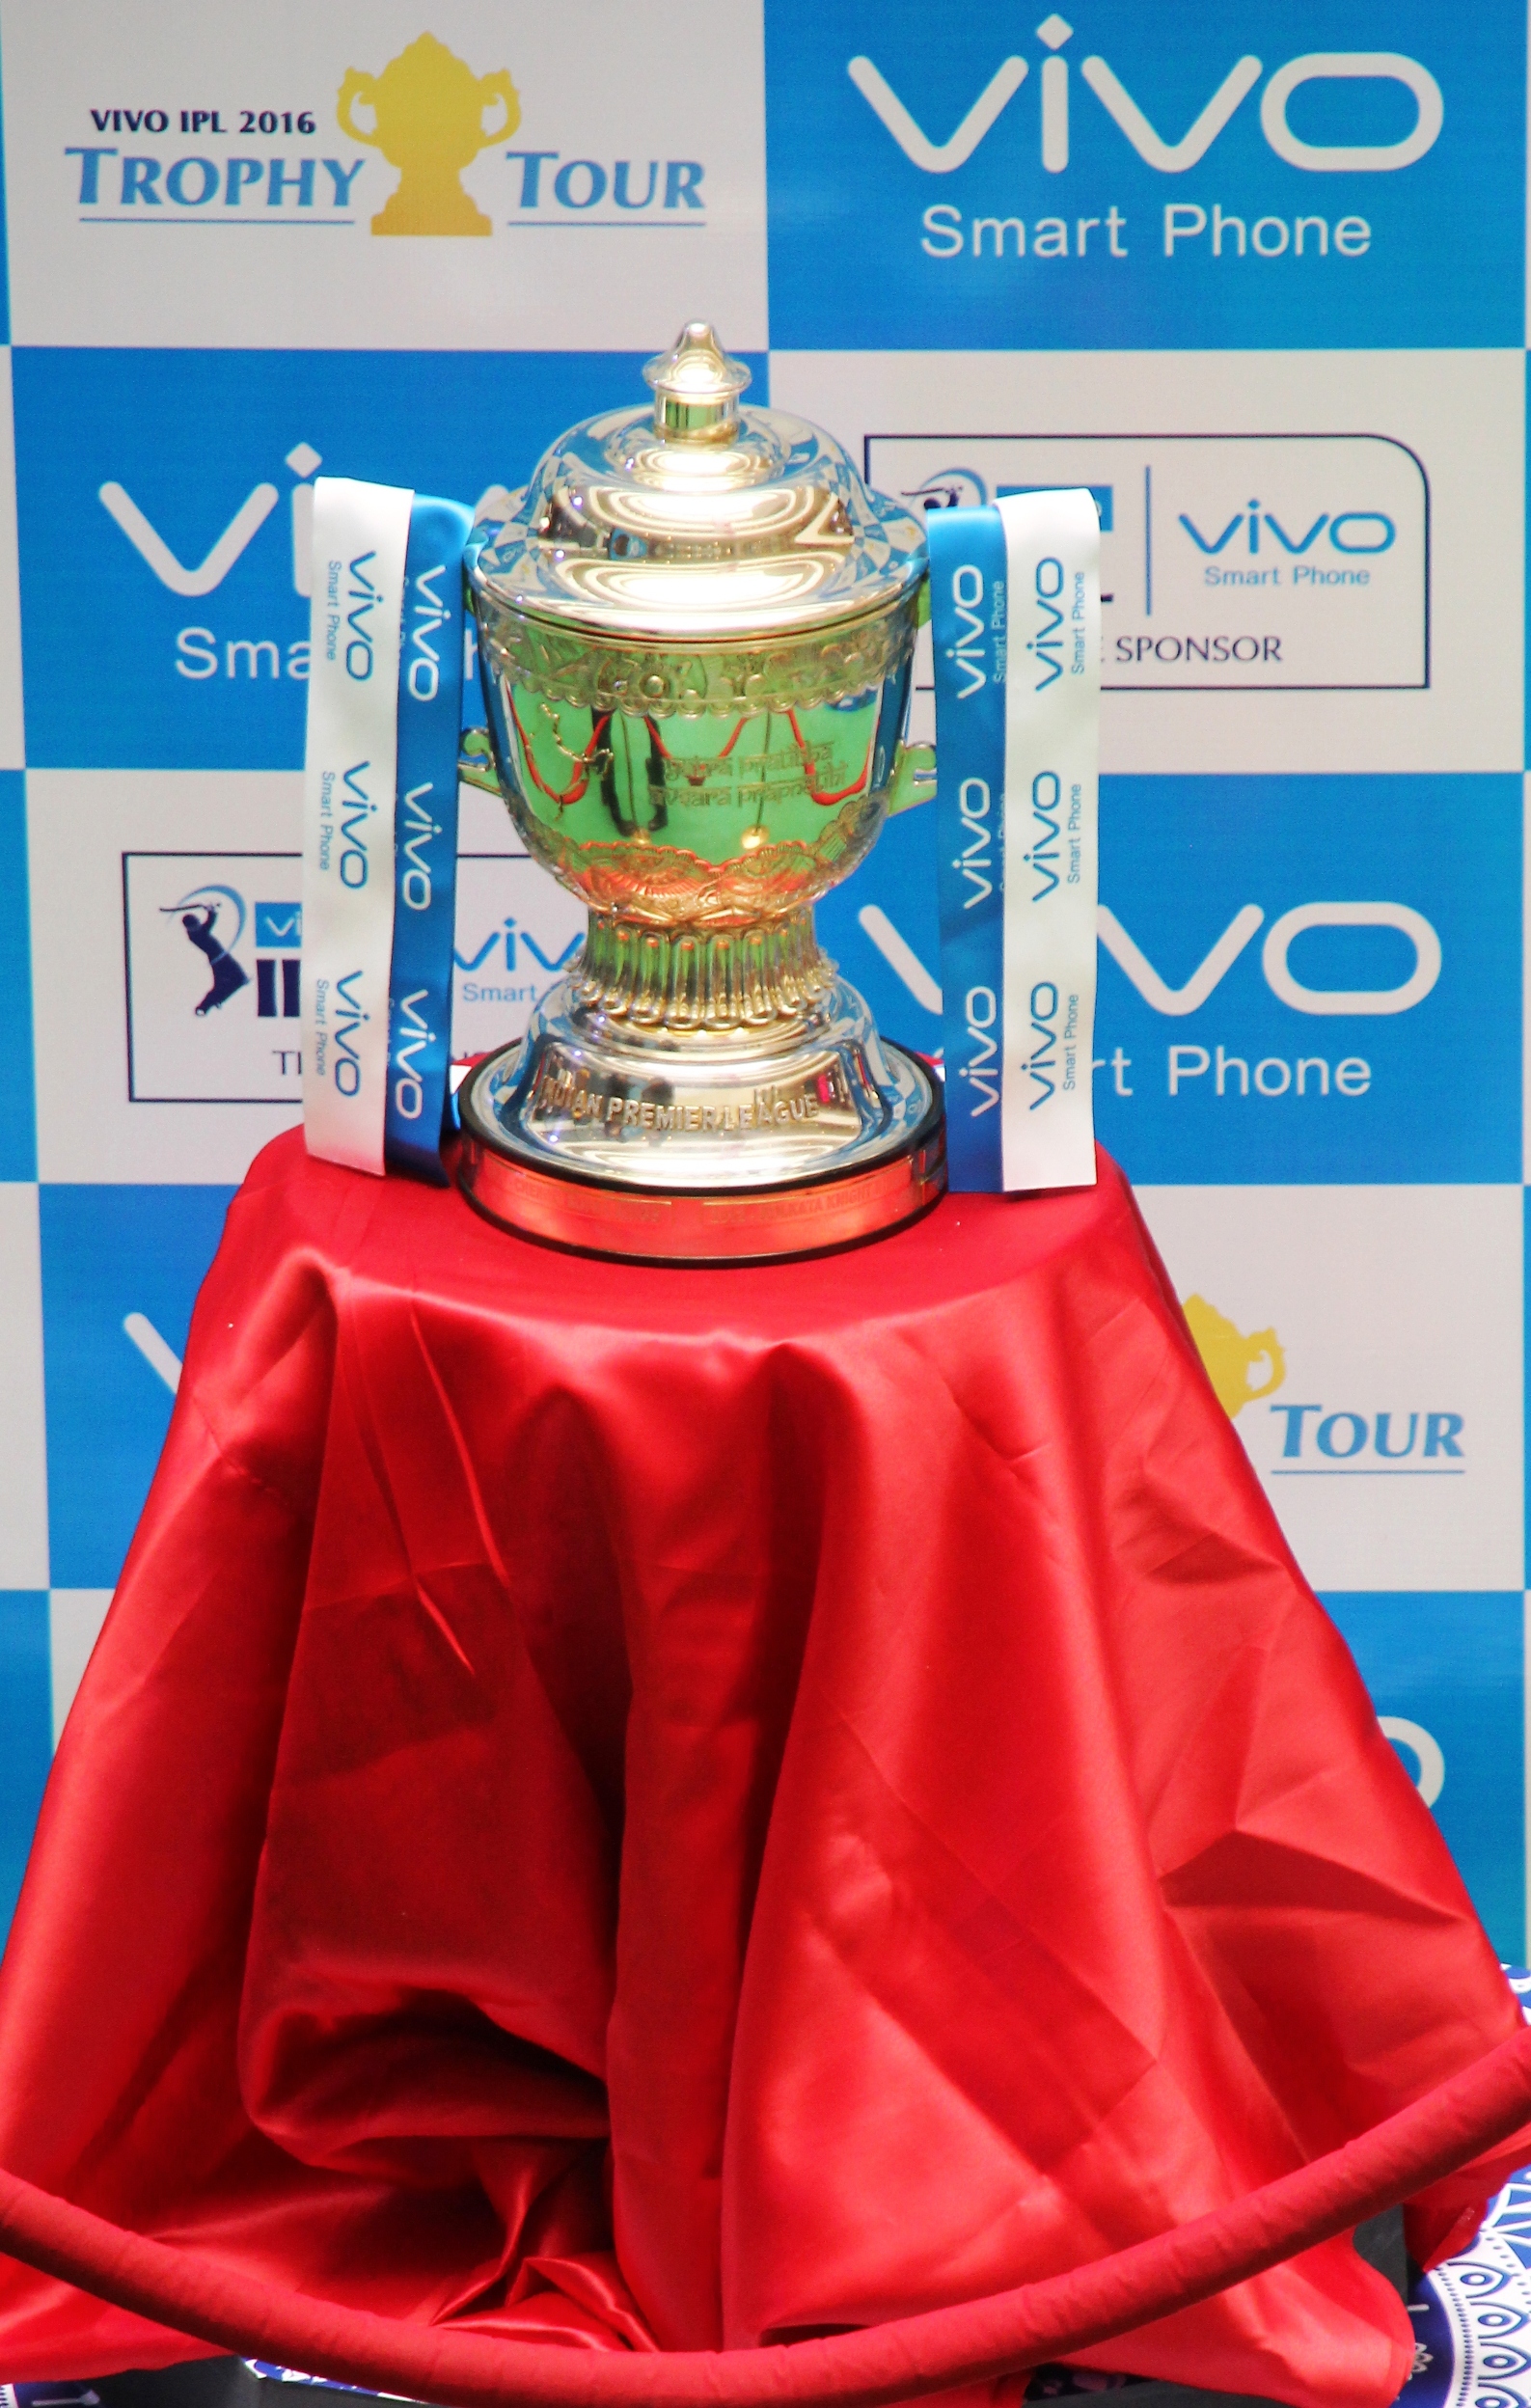 VIVO IPL trophy showcased during the VIVO IPL trophy tour in Hyderabad on March 20  2016